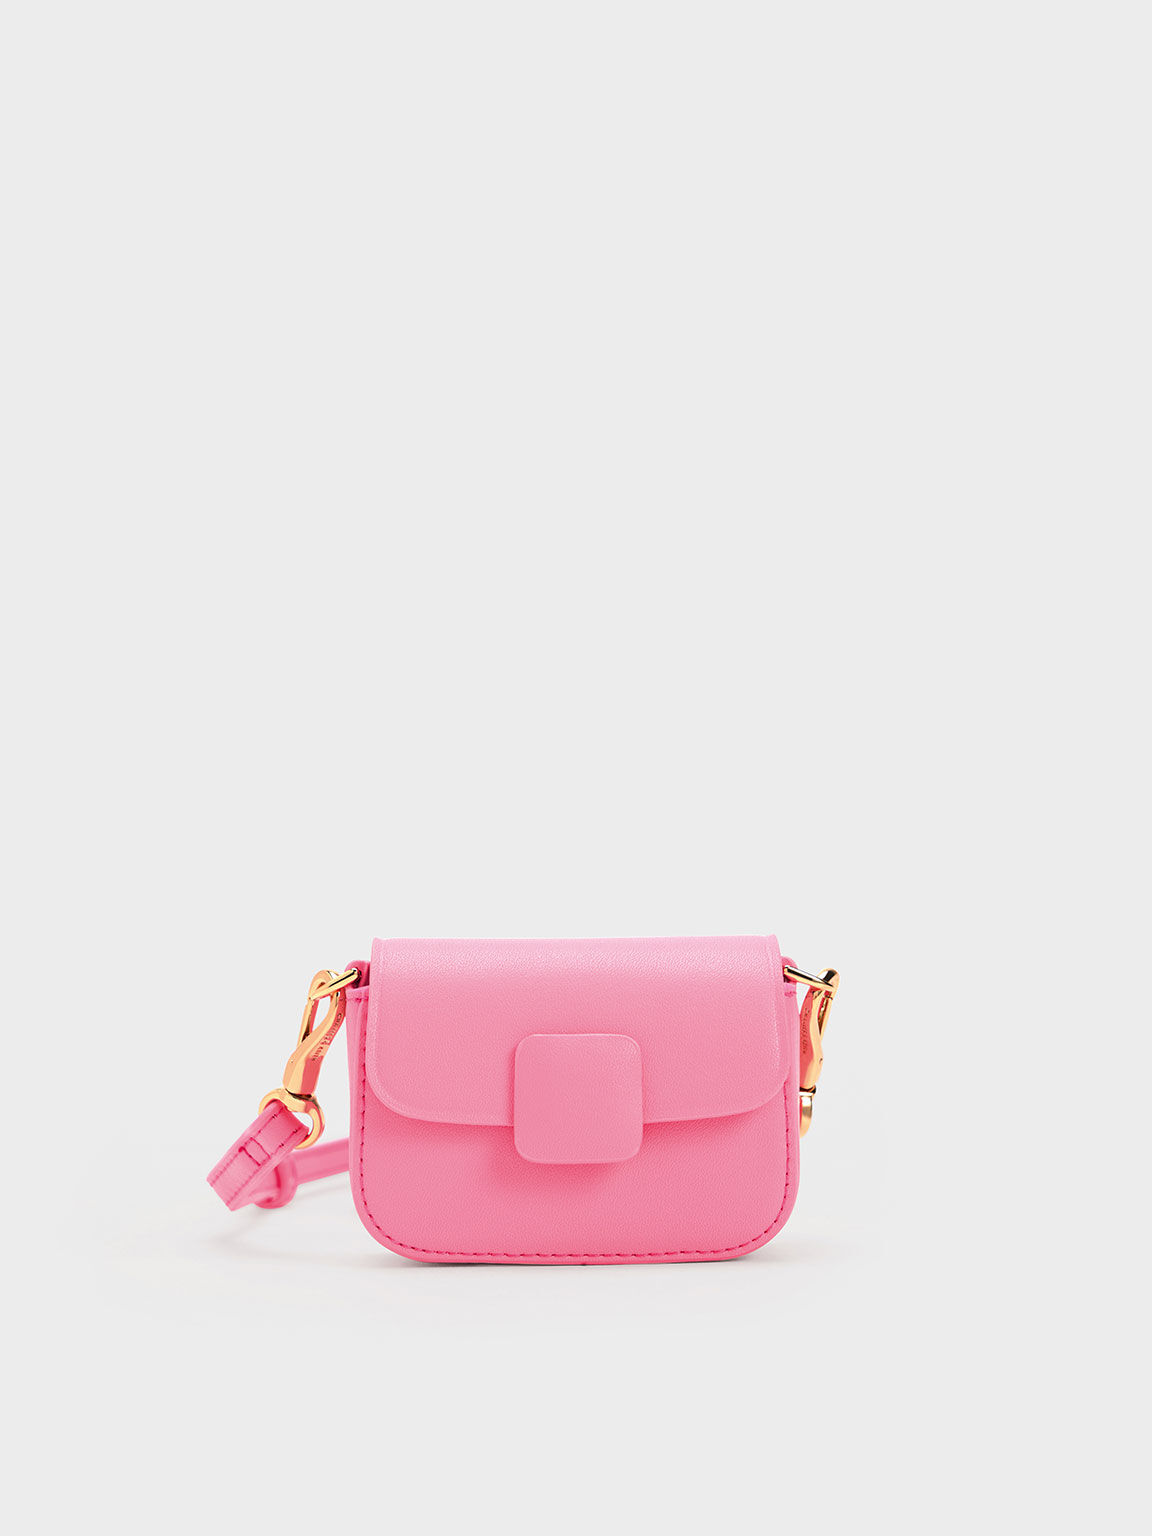 Light Pink Chain Handle Strawberry-Print Vanity Pouch - CHARLES & KEITH US